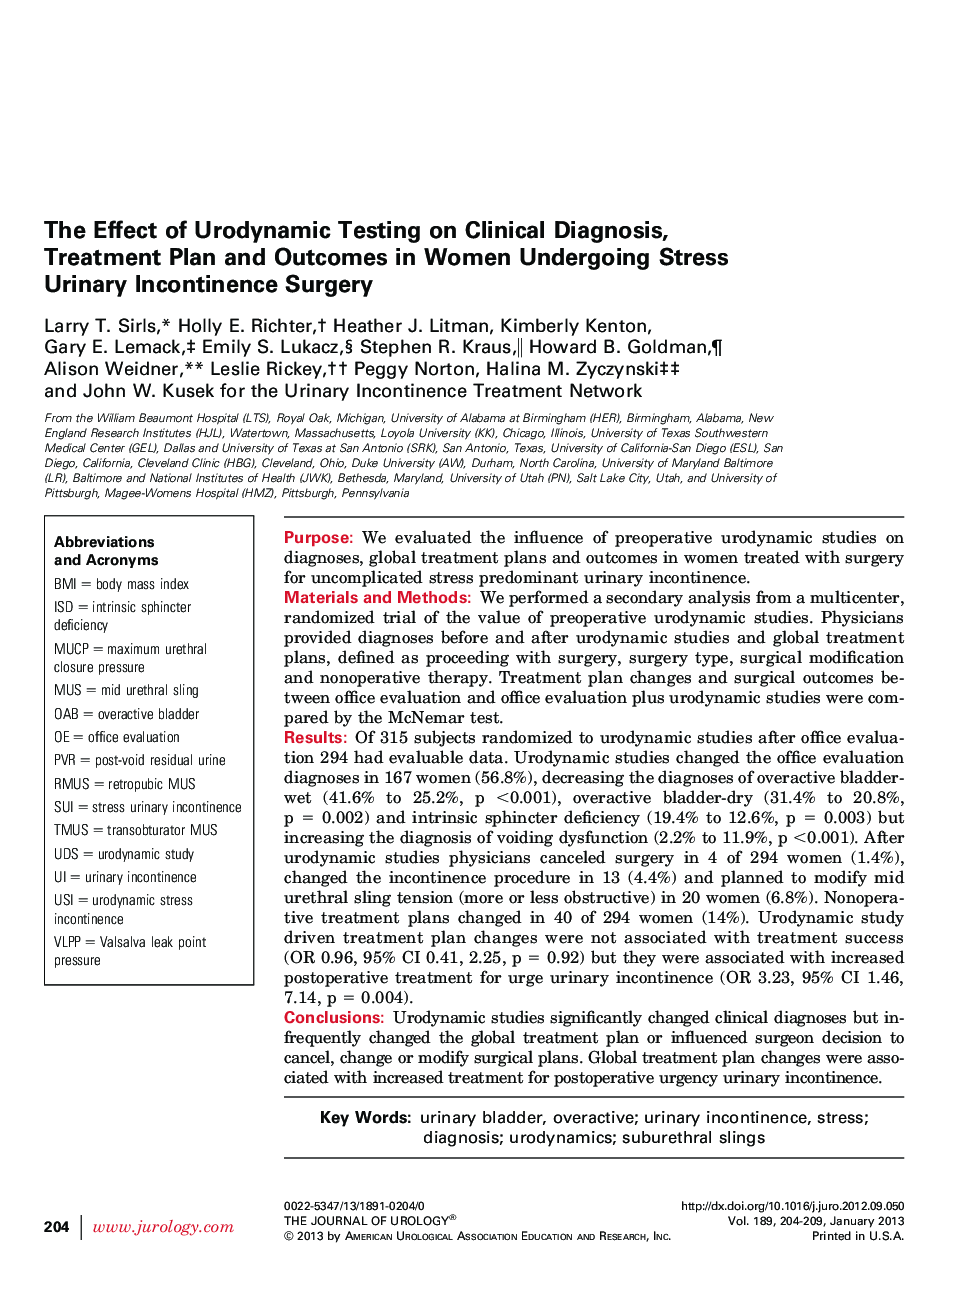 The Effect of Urodynamic Testing on Clinical Diagnosis, Treatment Plan and Outcomes in Women Undergoing Stress Urinary Incontinence Surgery